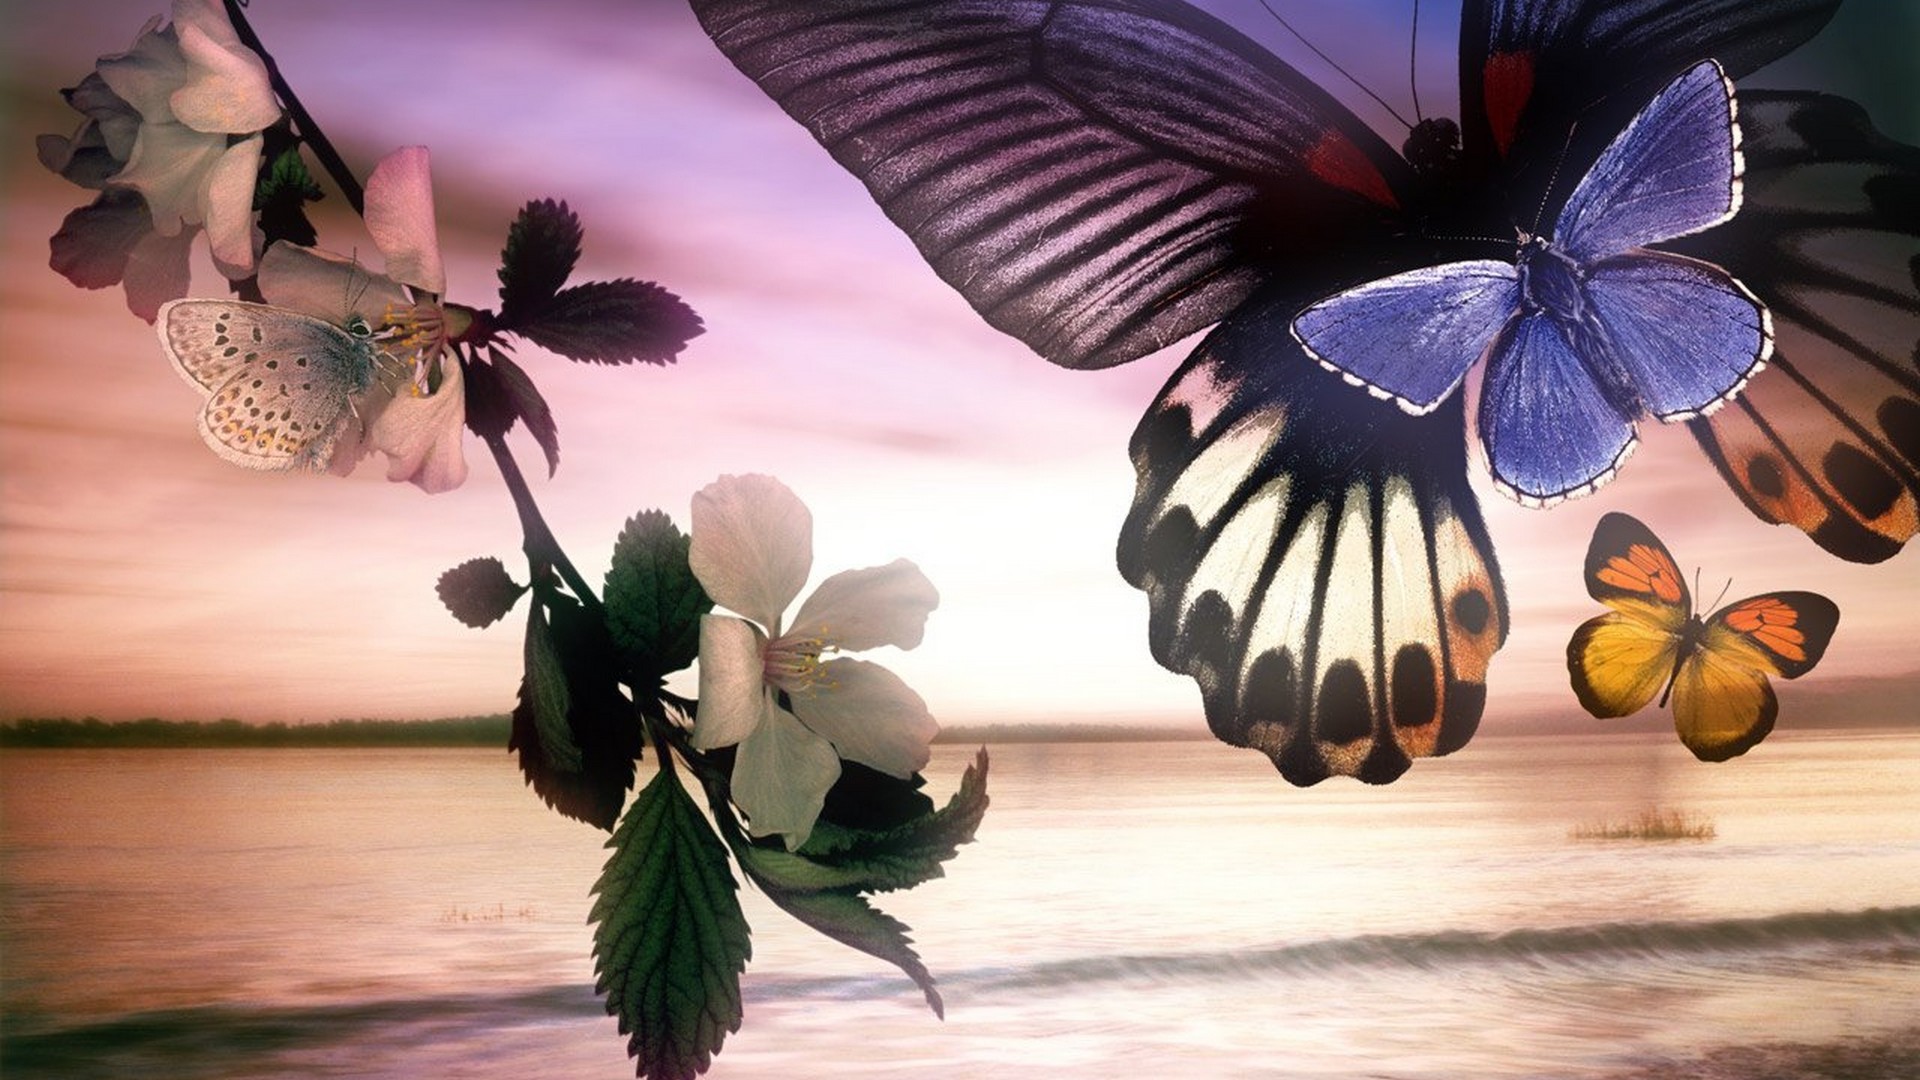 Butterfly Pictures Wallpaper HD 1920x1080